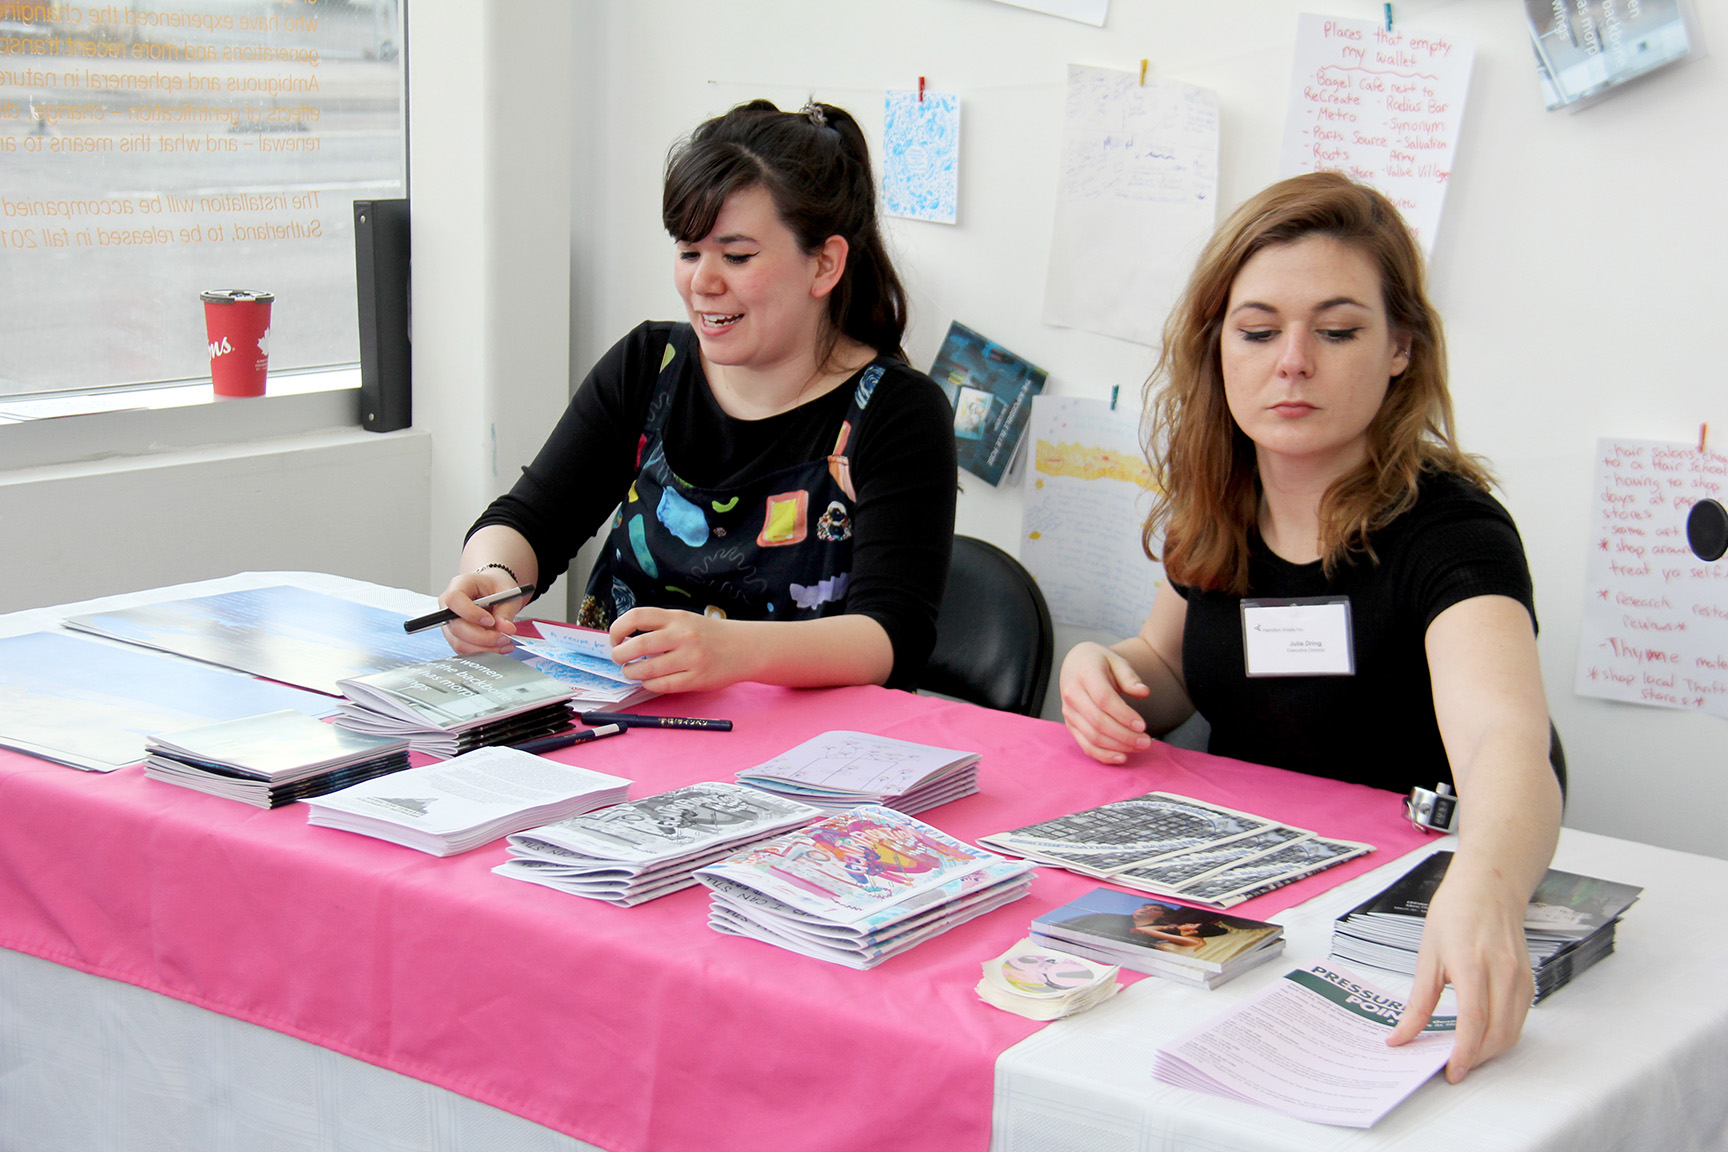 A brightly lit photo of two people seated behind the Zine and Reading corner, which was placed right behind the Inc.’s front door. One person is Julie Dring, a white woman with mid-length wavy hair and winged eyeliner. She is reaching over an assortment of zines and other printed materials on the table in front of her.